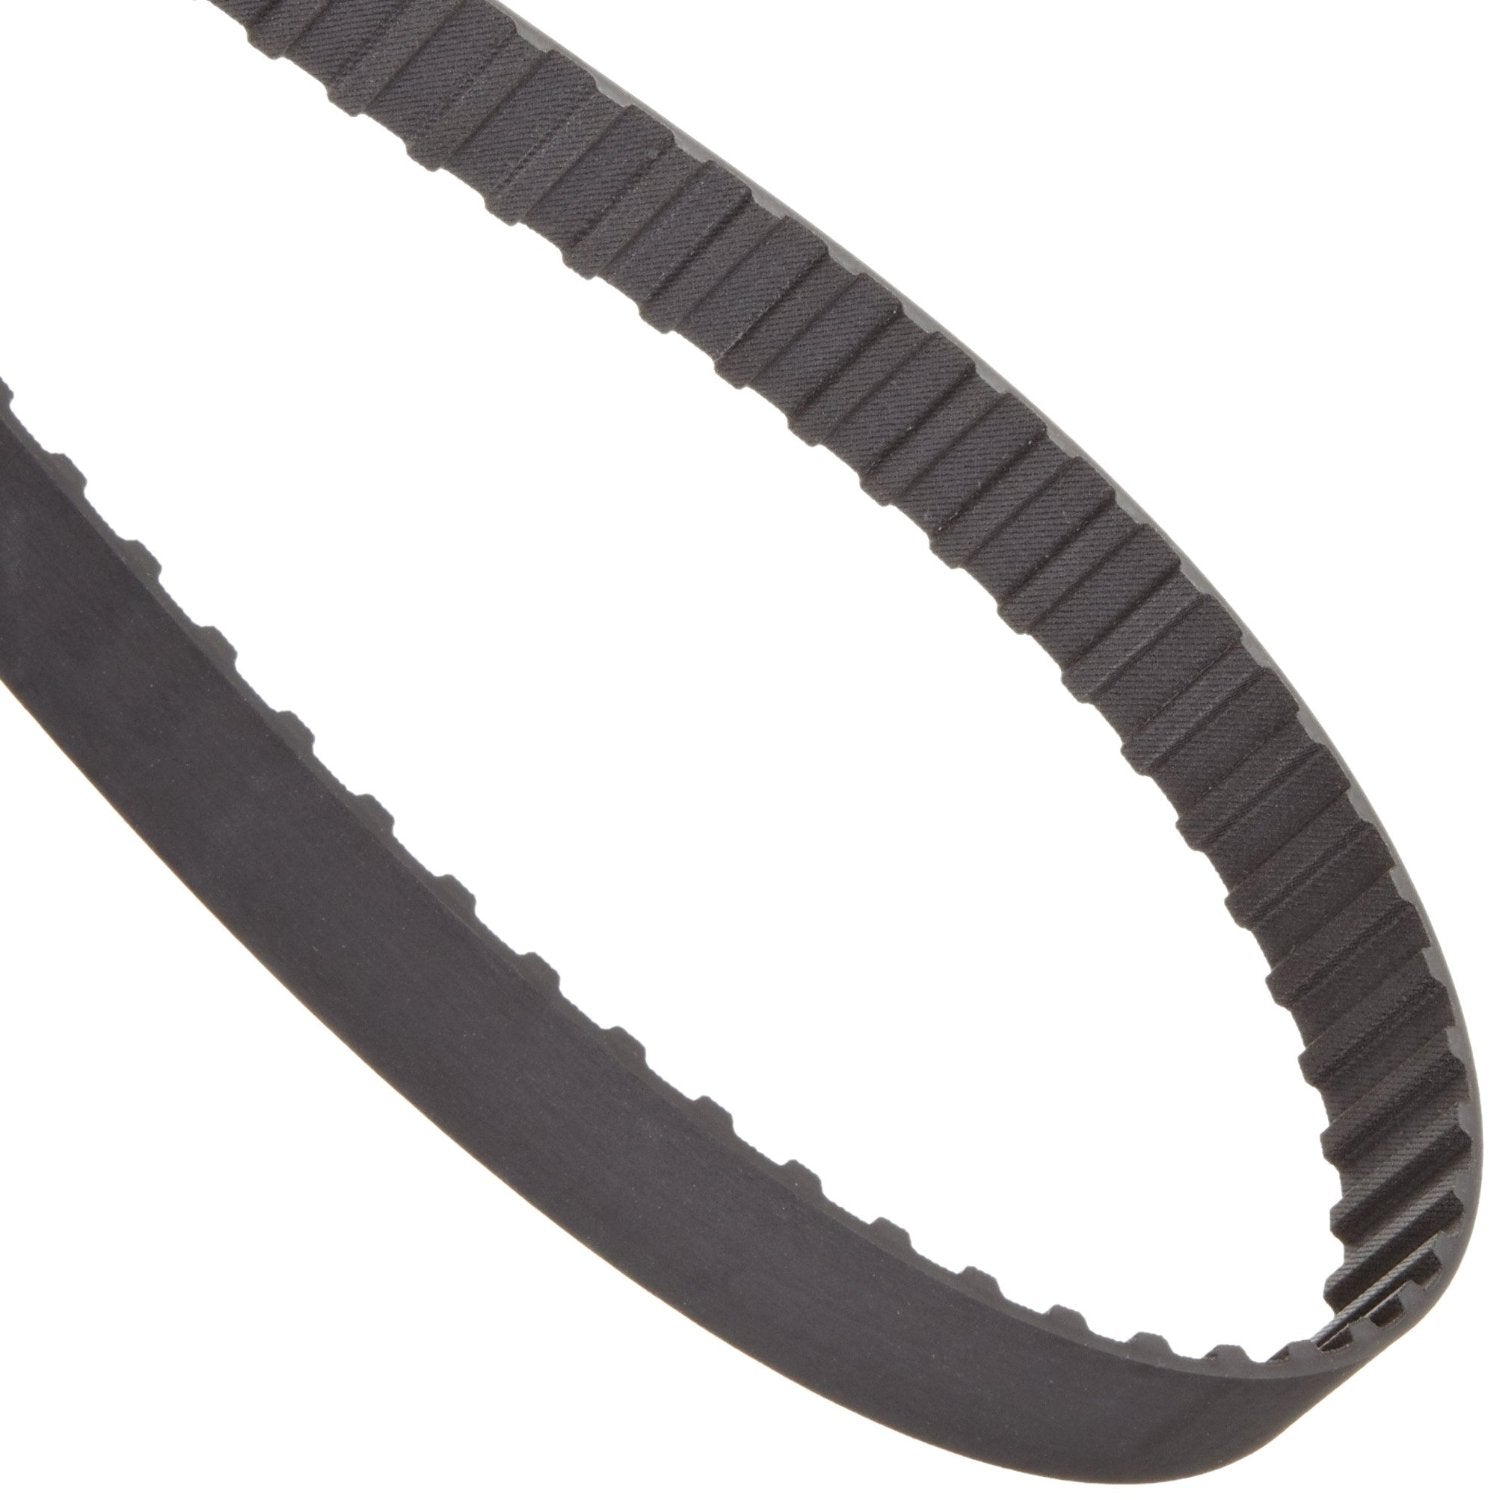 Westbend breadmaker Toothed Drive Belt 41073